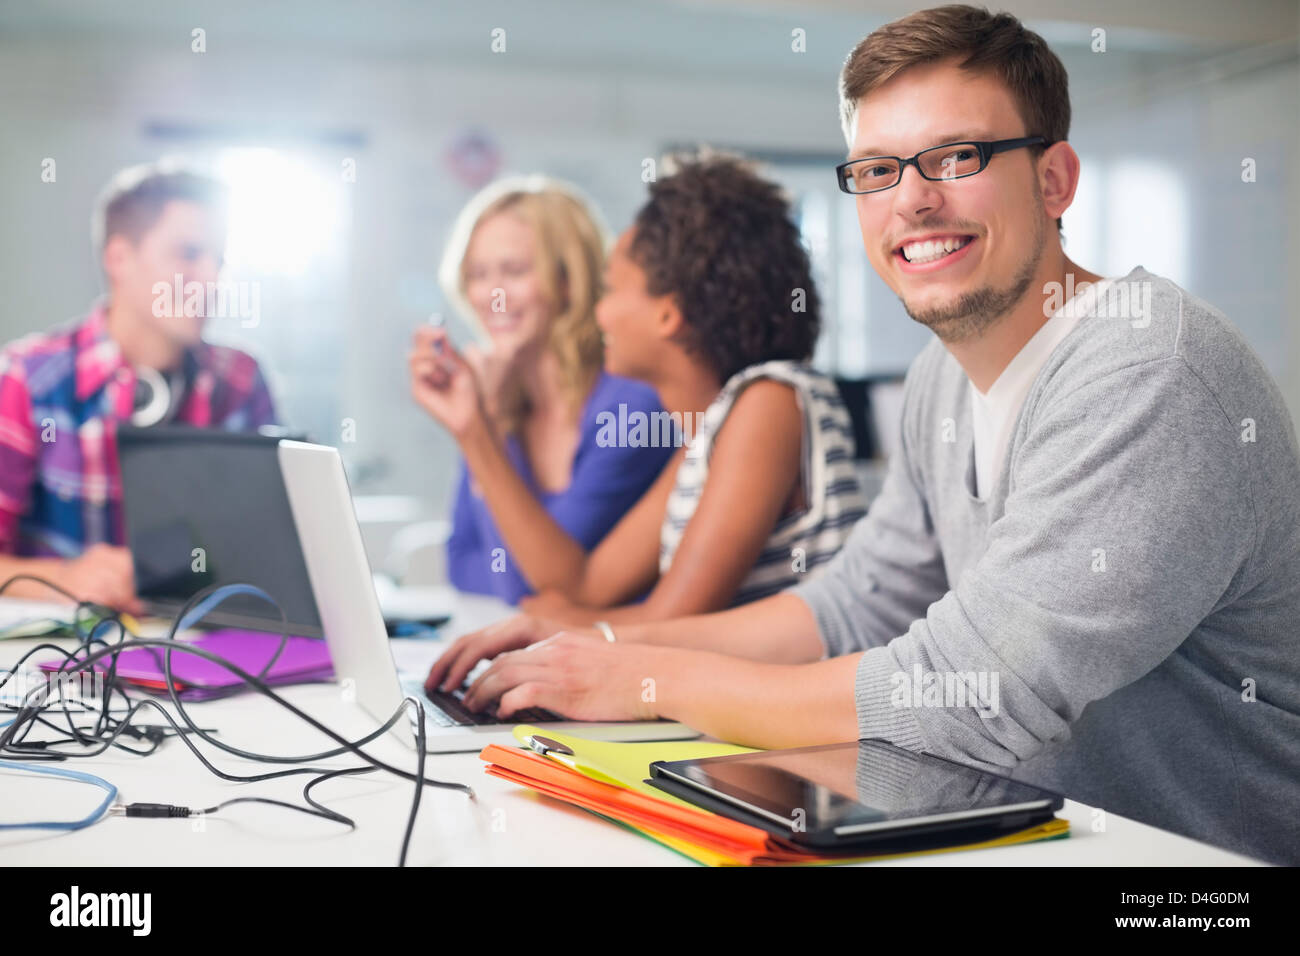 Businessman smiling in meeting Banque D'Images